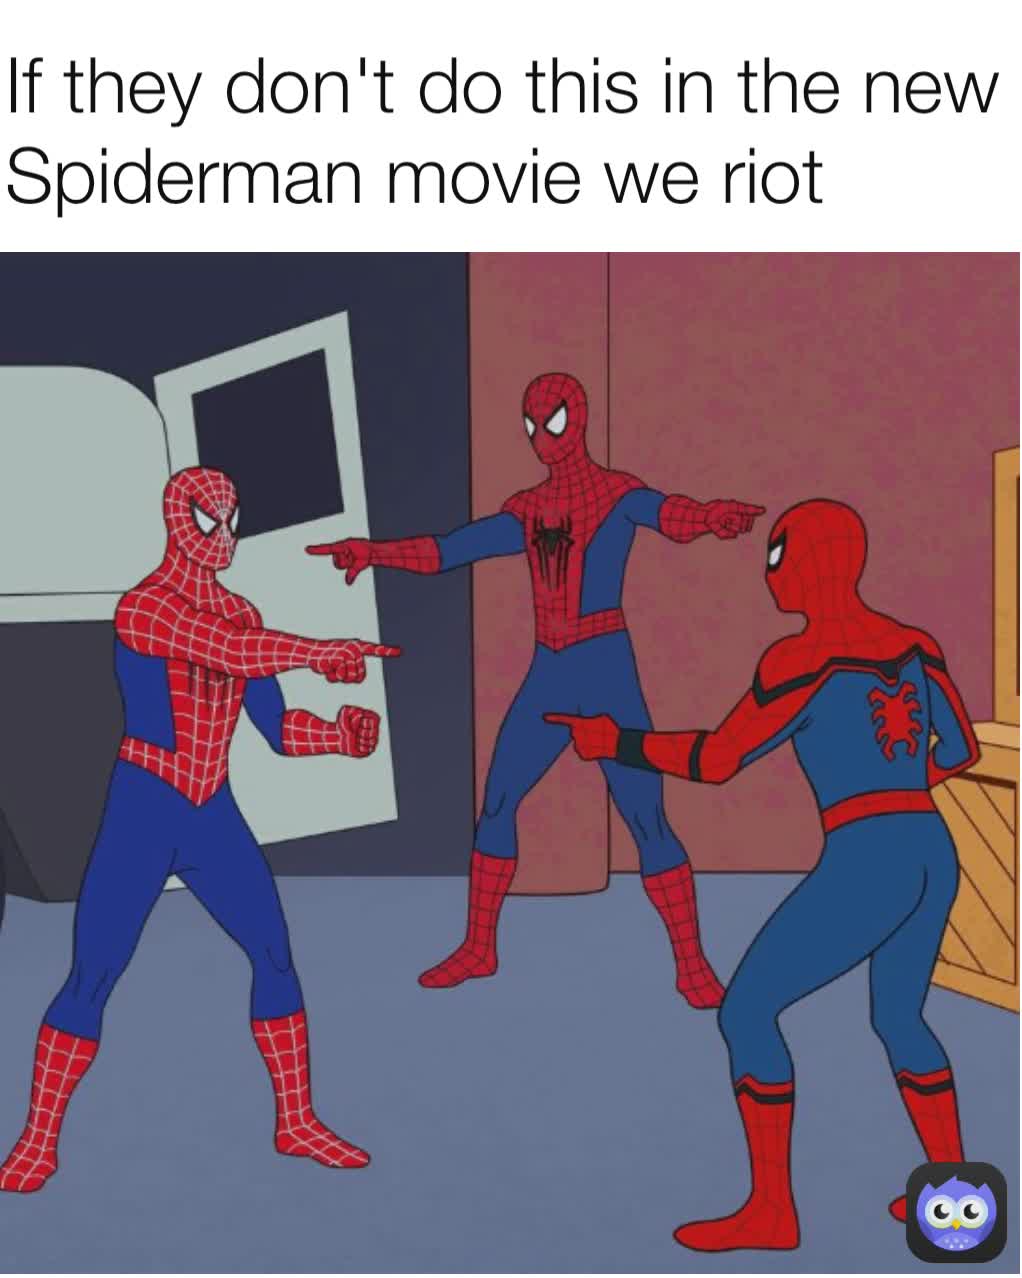 If they don't do this in the new Spiderman movie we riot